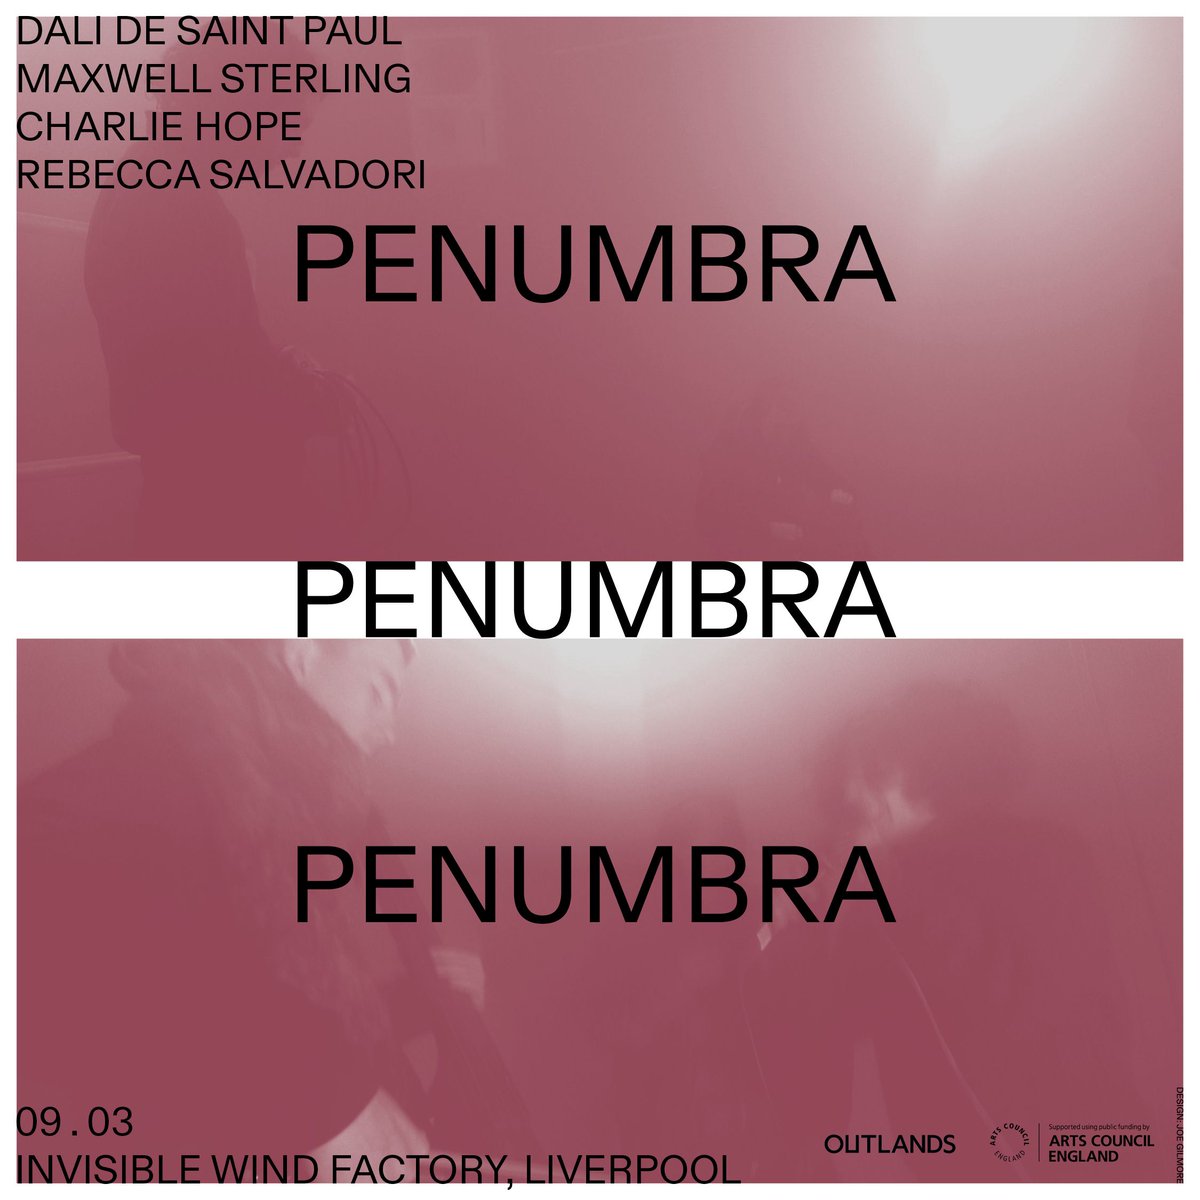 Don’t miss the chance to experience PENUMBRA, a stunning sonic & moving image performance ft. Dali de St Paul, Maxwell Sterling, Rebecca Salvadori, & Charlie Hope. Coming next to @iwfactory on March 9, 2024. Book your tickets now - link in bio #LetsCreate #LiveMusic